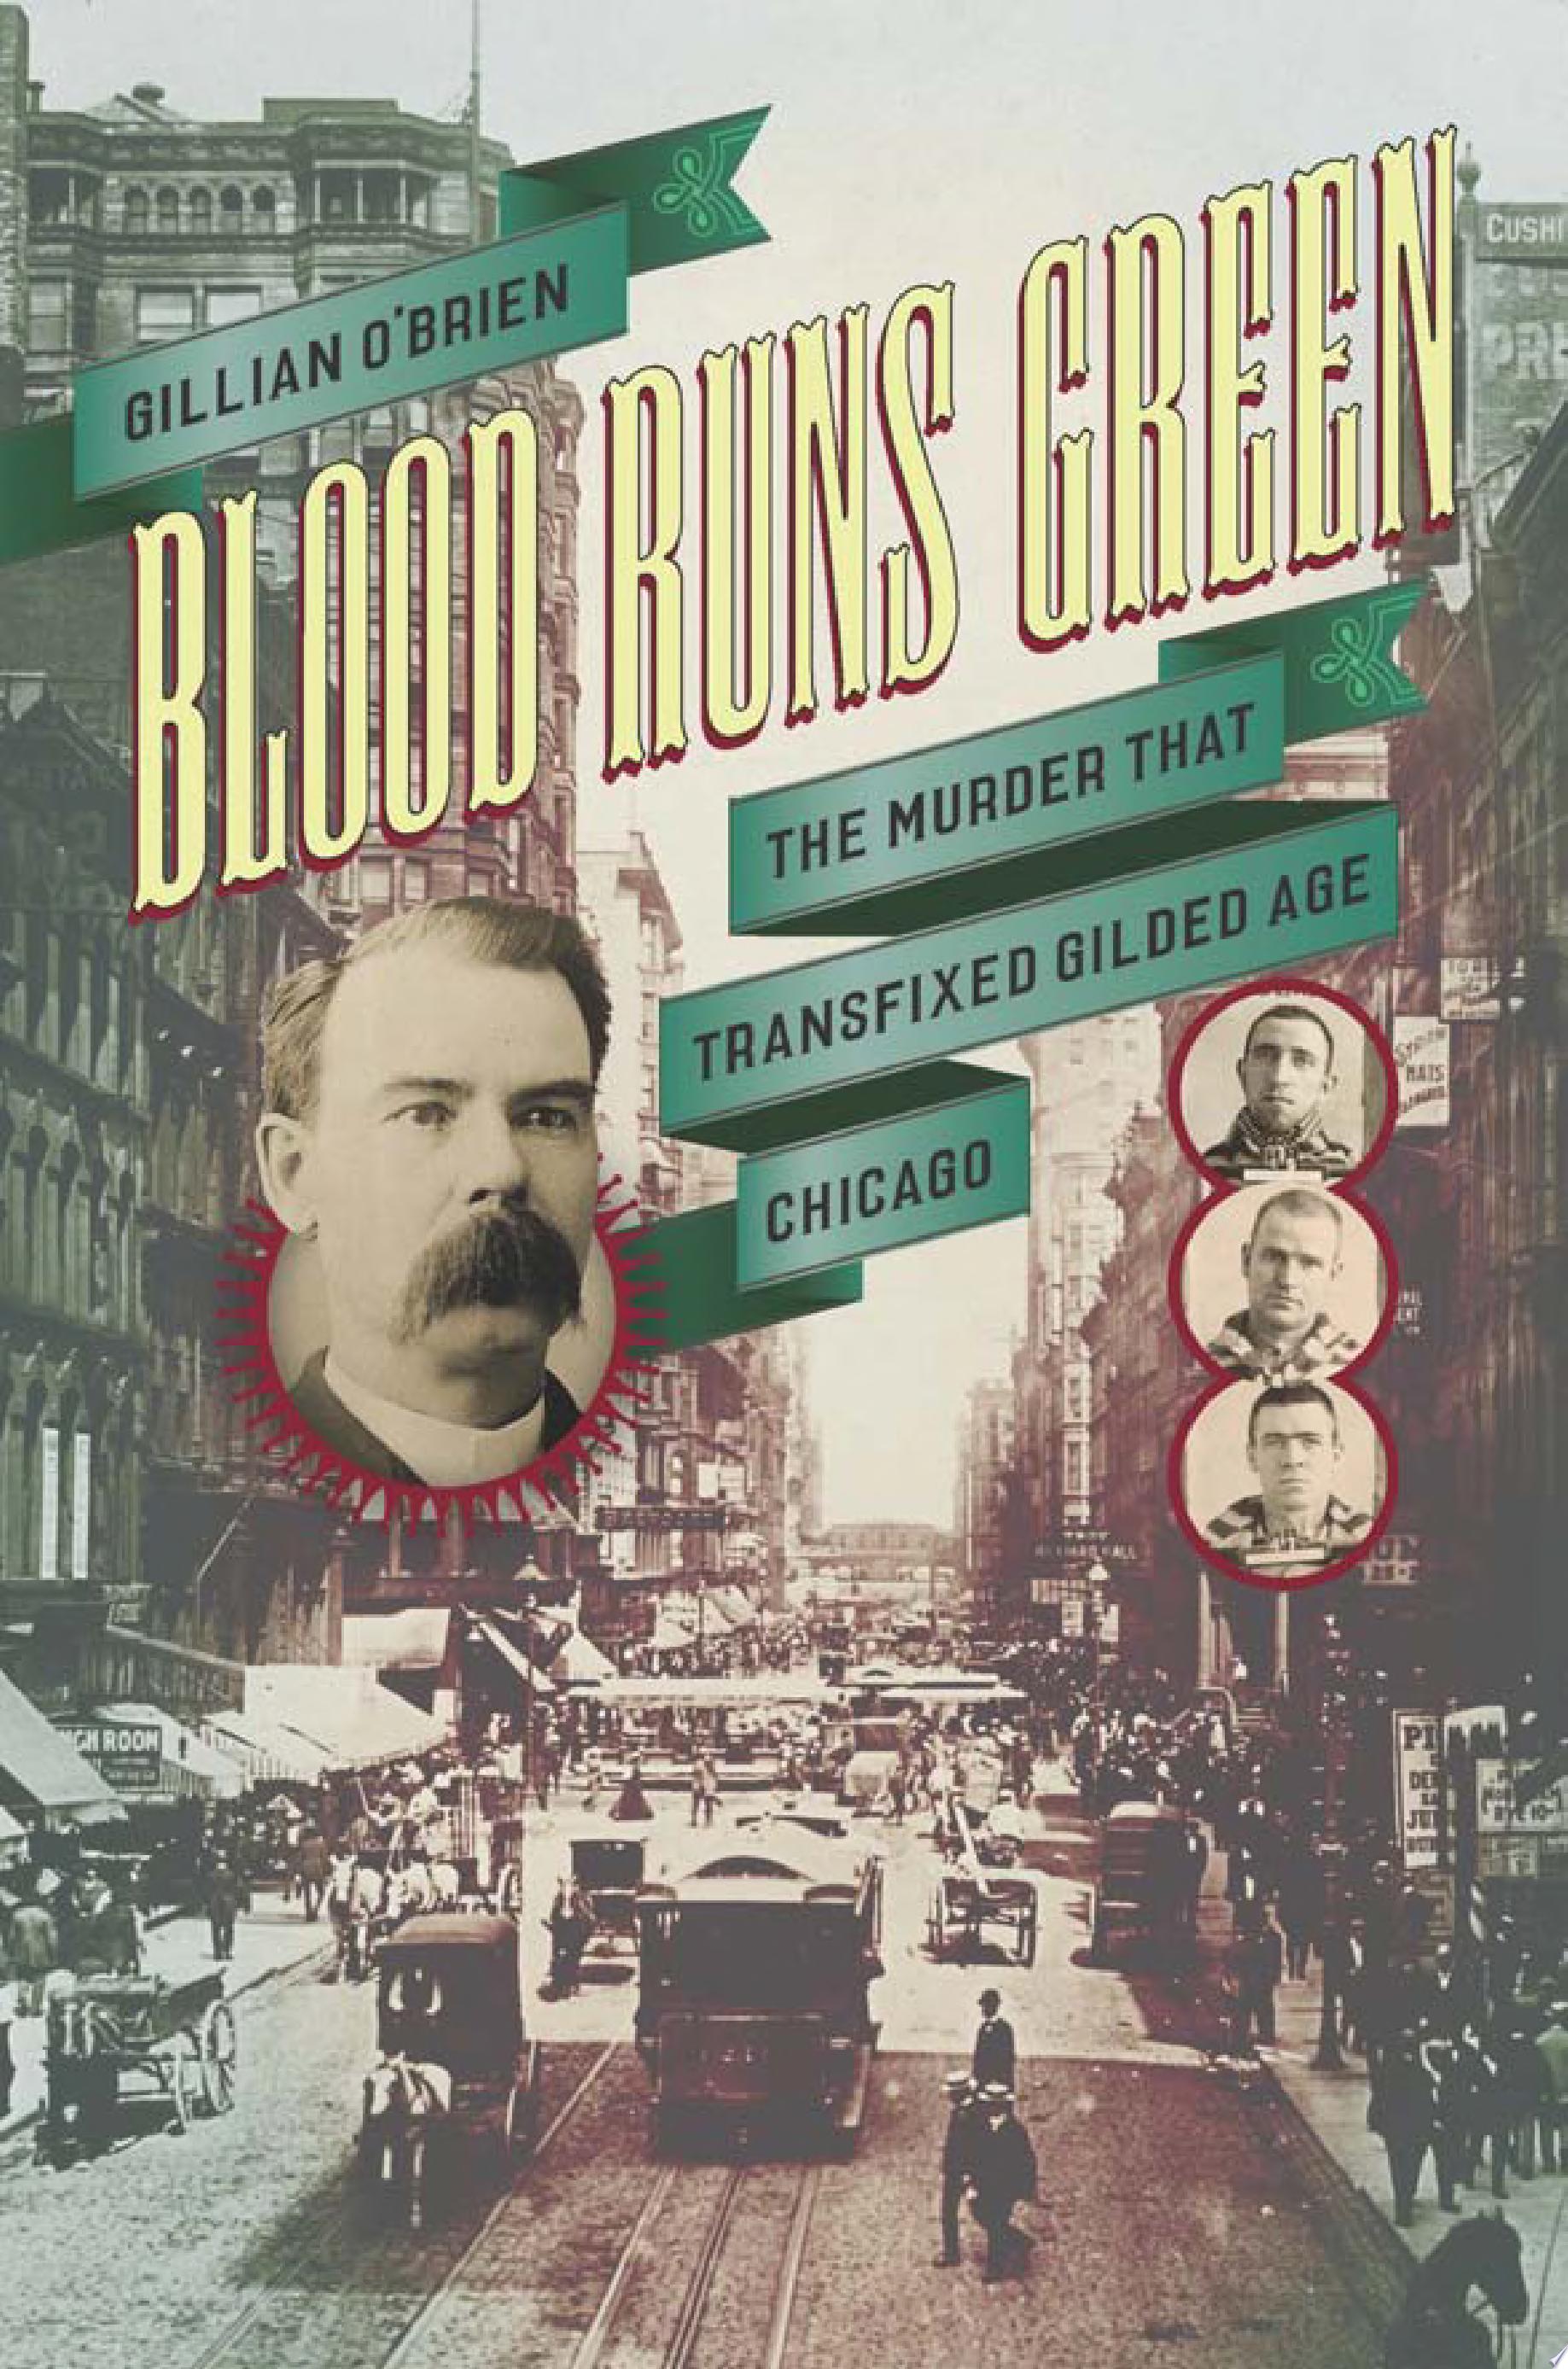 Image for "Blood Runs Green"